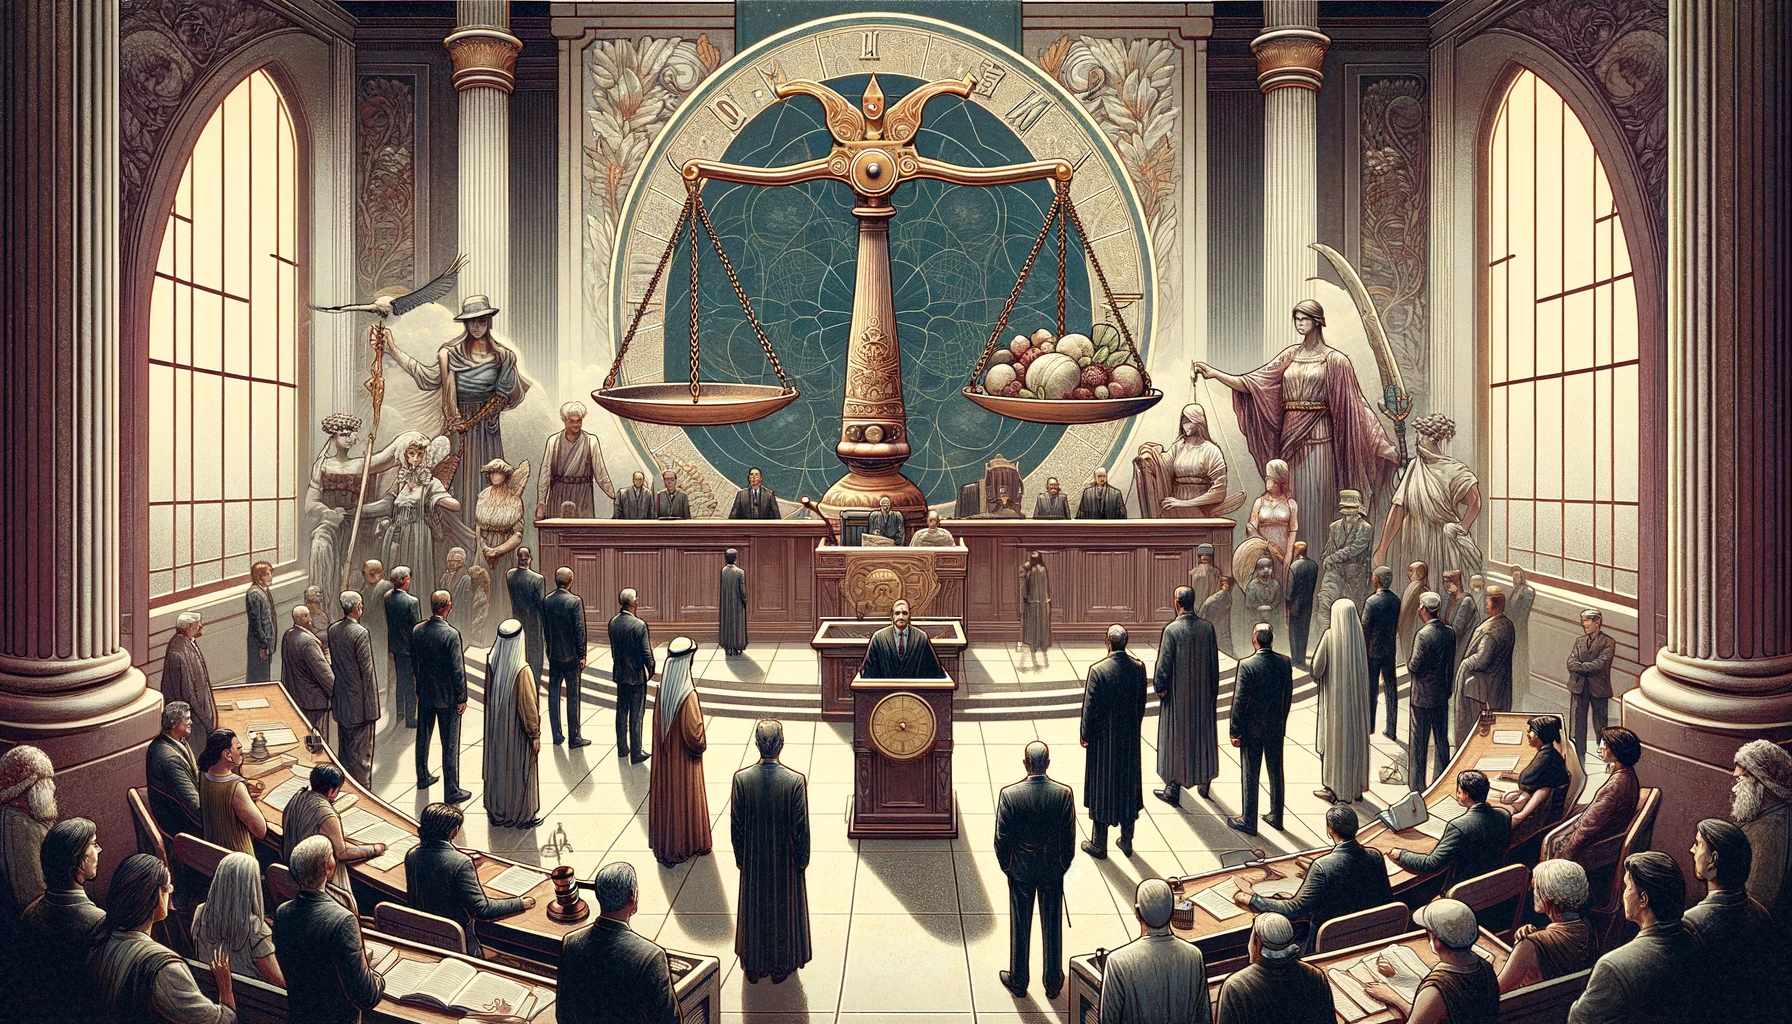 "Set in a courtroom, the visualization features a large scale symbolizing the weighing of evidence and the impartial judgment of diverse individuals before it. The balanced scale and legal symbols underscore the principles of fairness, equality, and the rule of law, set against a backdrop that conveys solemnity and respect for justice, with a color palette emphasizing clarity, neutrality, and the objective nature of justice in guiding actions and resolving disputes. Through its imagery, viewers are prompted to contemplate the importance of upholding fairness and impartiality in legal proceedings and societal governance."